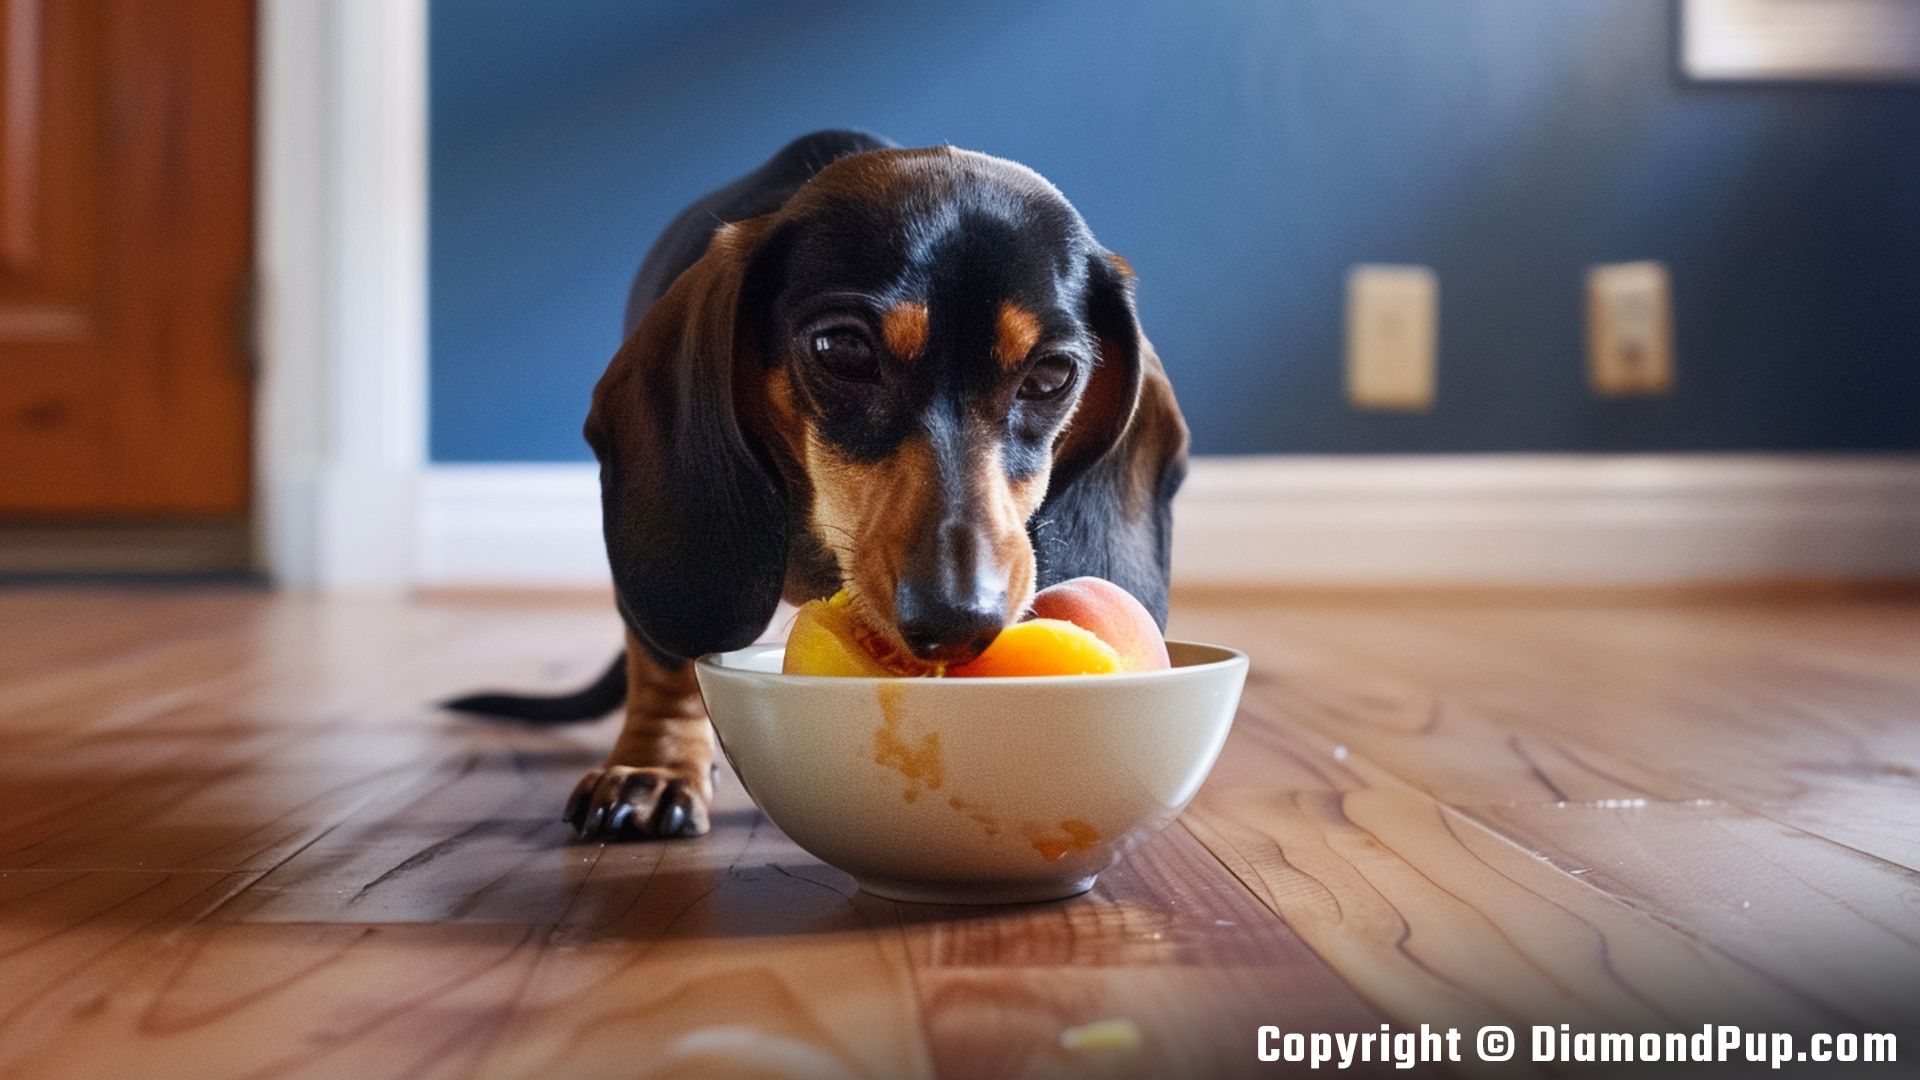 Photograph of an Adorable Dachshund Snacking on Peaches